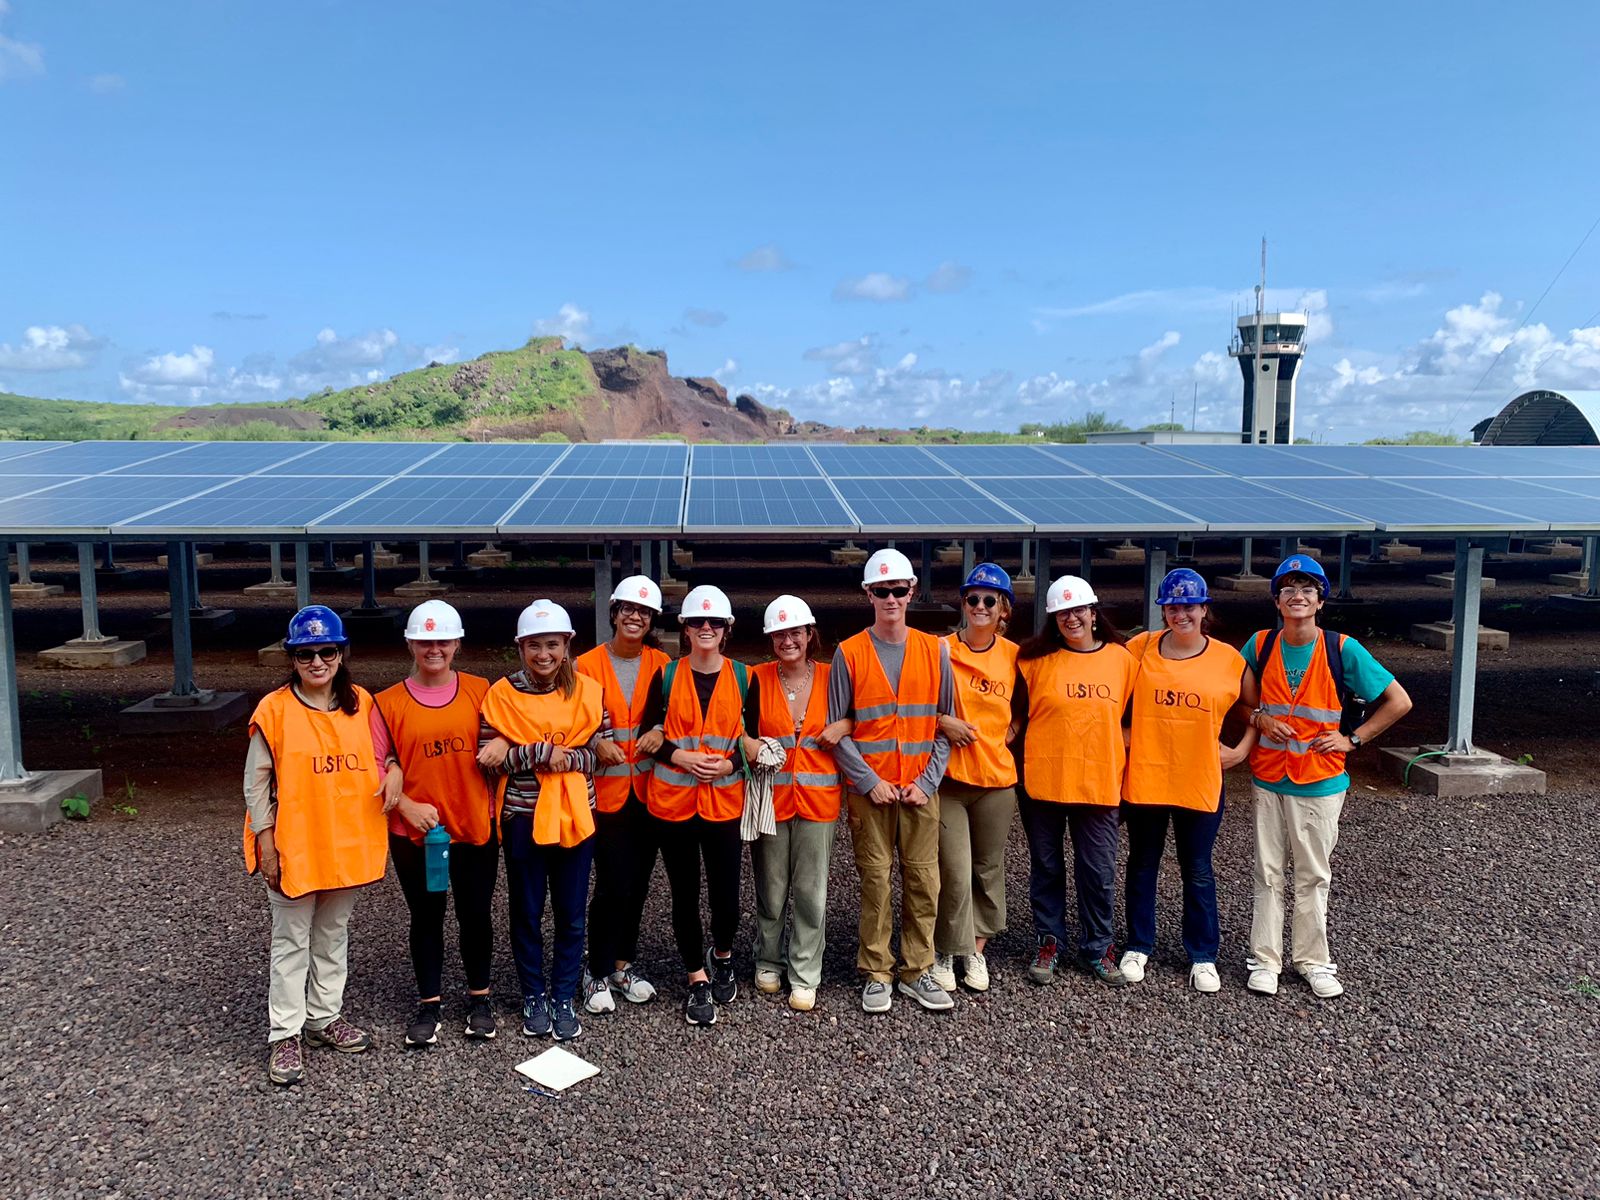 a group of students wearing orange safety vests and hard hats stands in front of a solar panel array